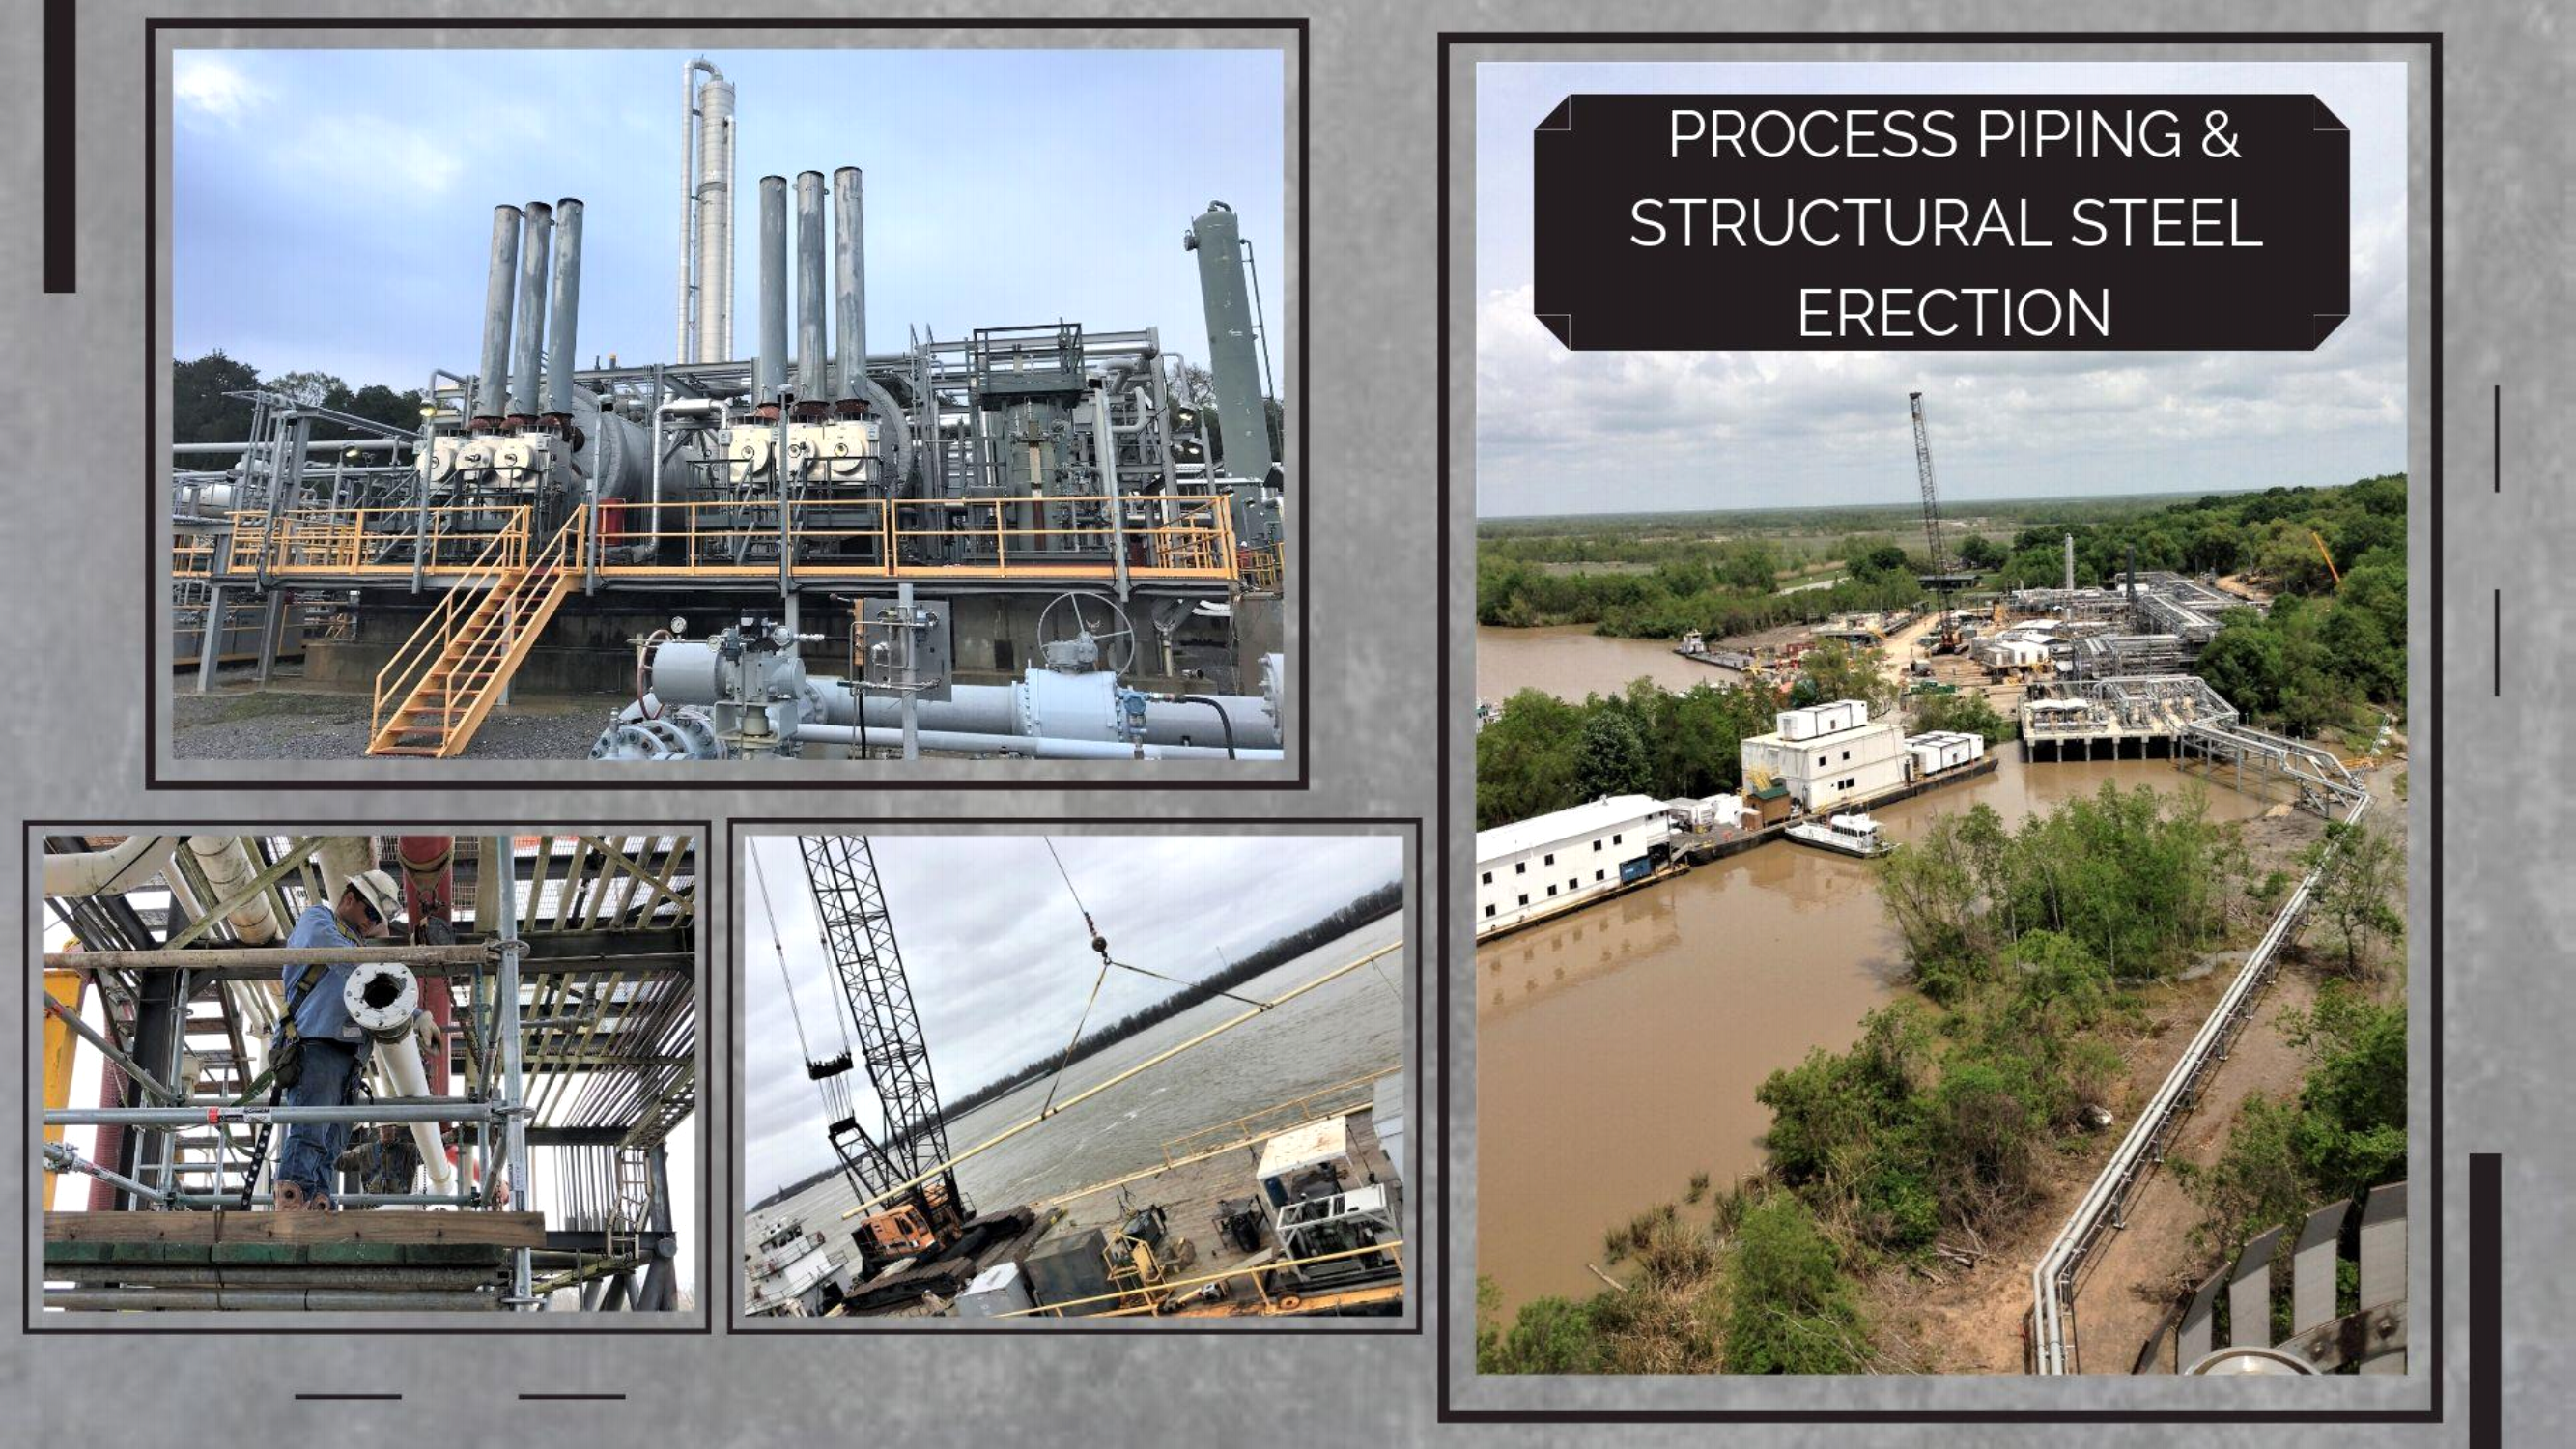 process piping & structural steel erection